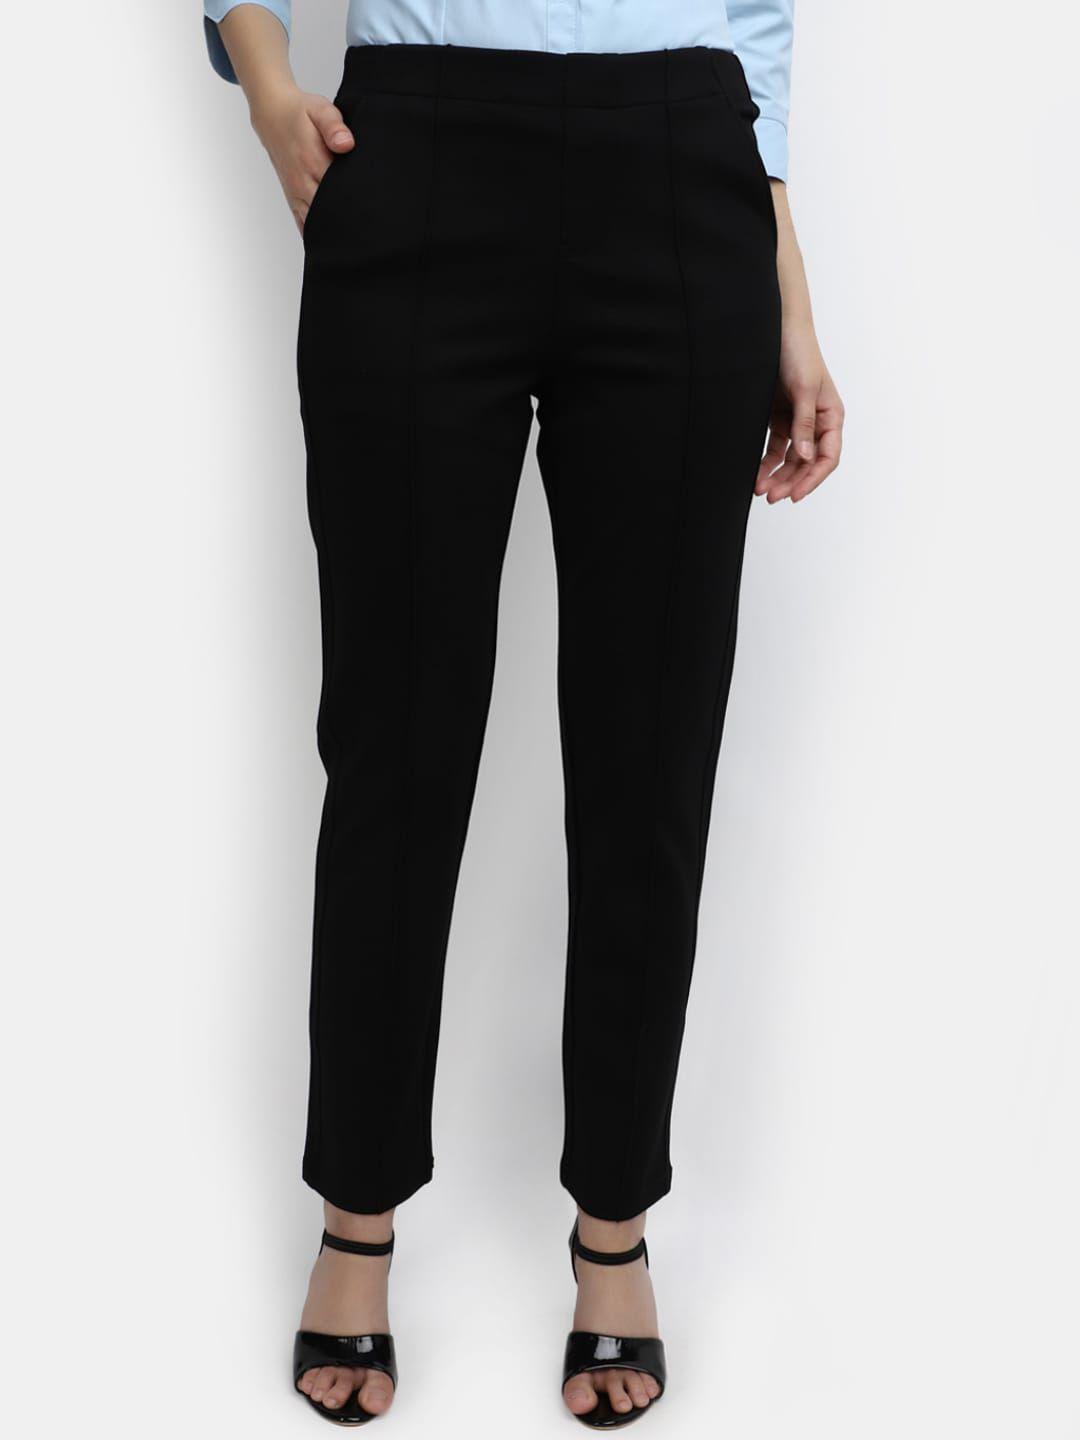 v-mart women mid-rise easy wash cotton formal trousers